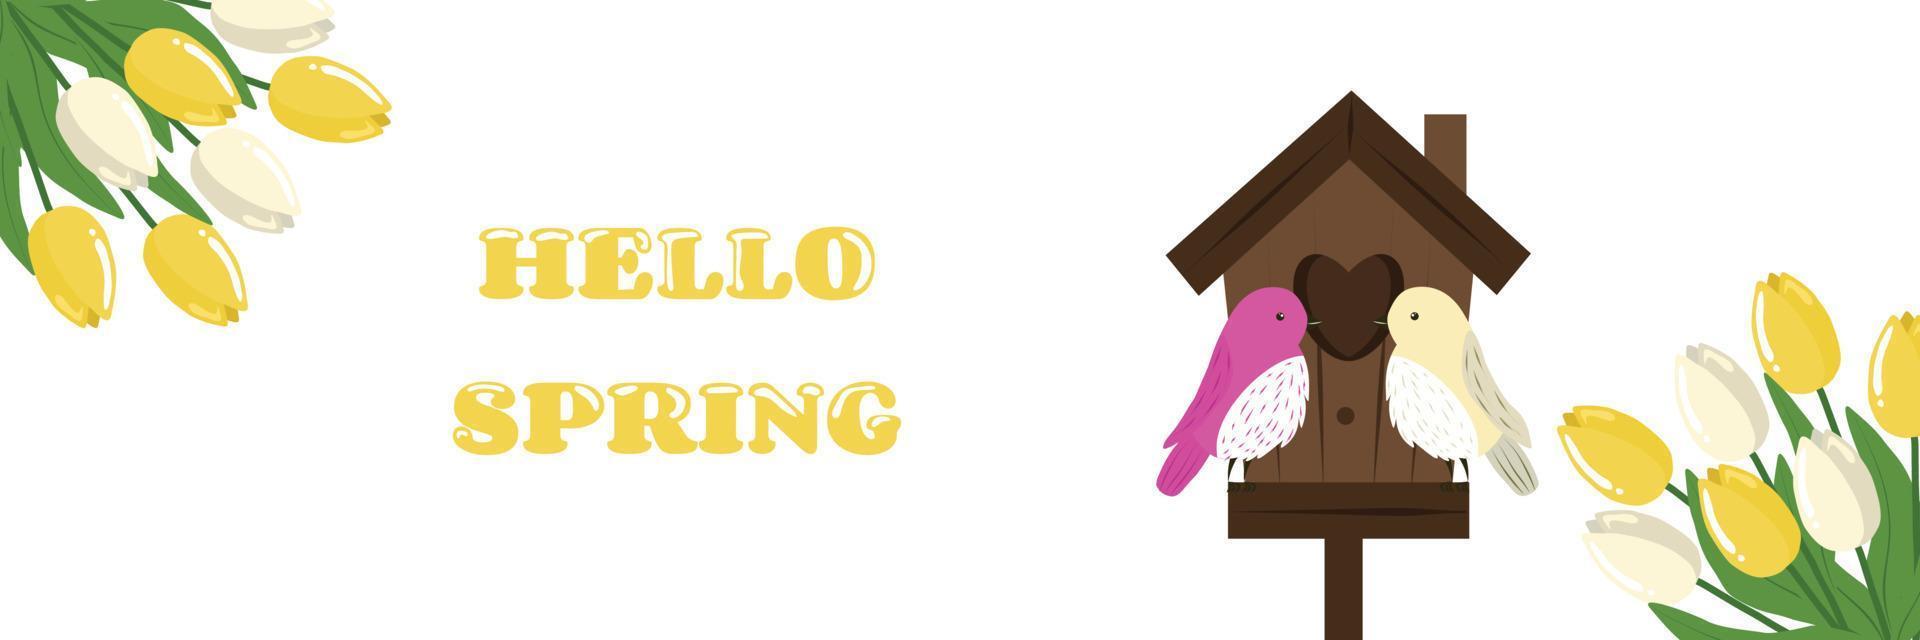 Cute Greeting Banner Hello Spring with Bouquets of Tulips and Birds in the Birdhouse vector